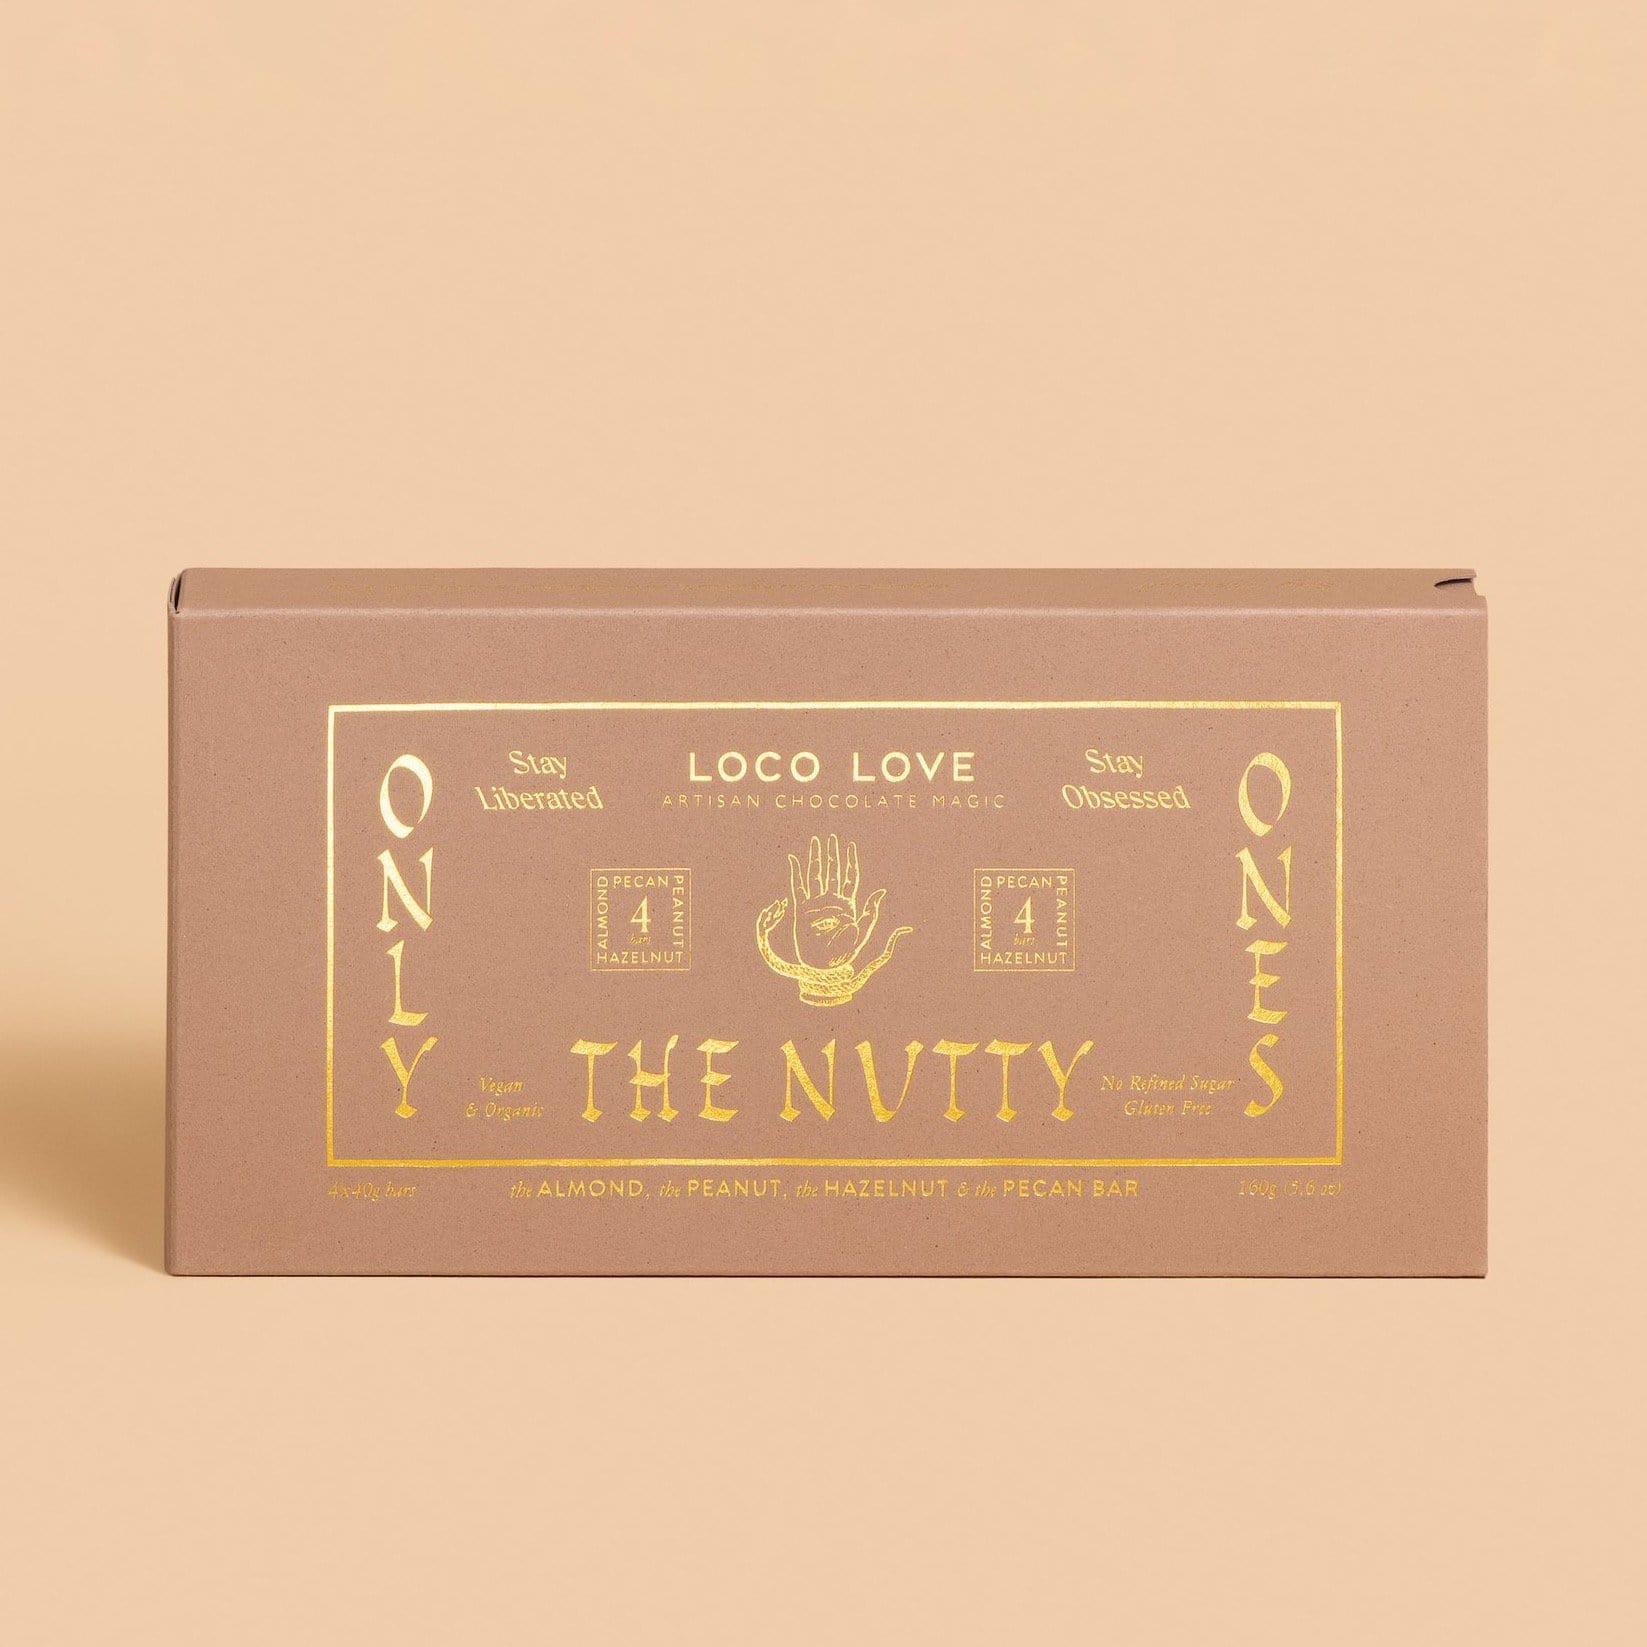 the nutty one's chocolate box. by Loco Love